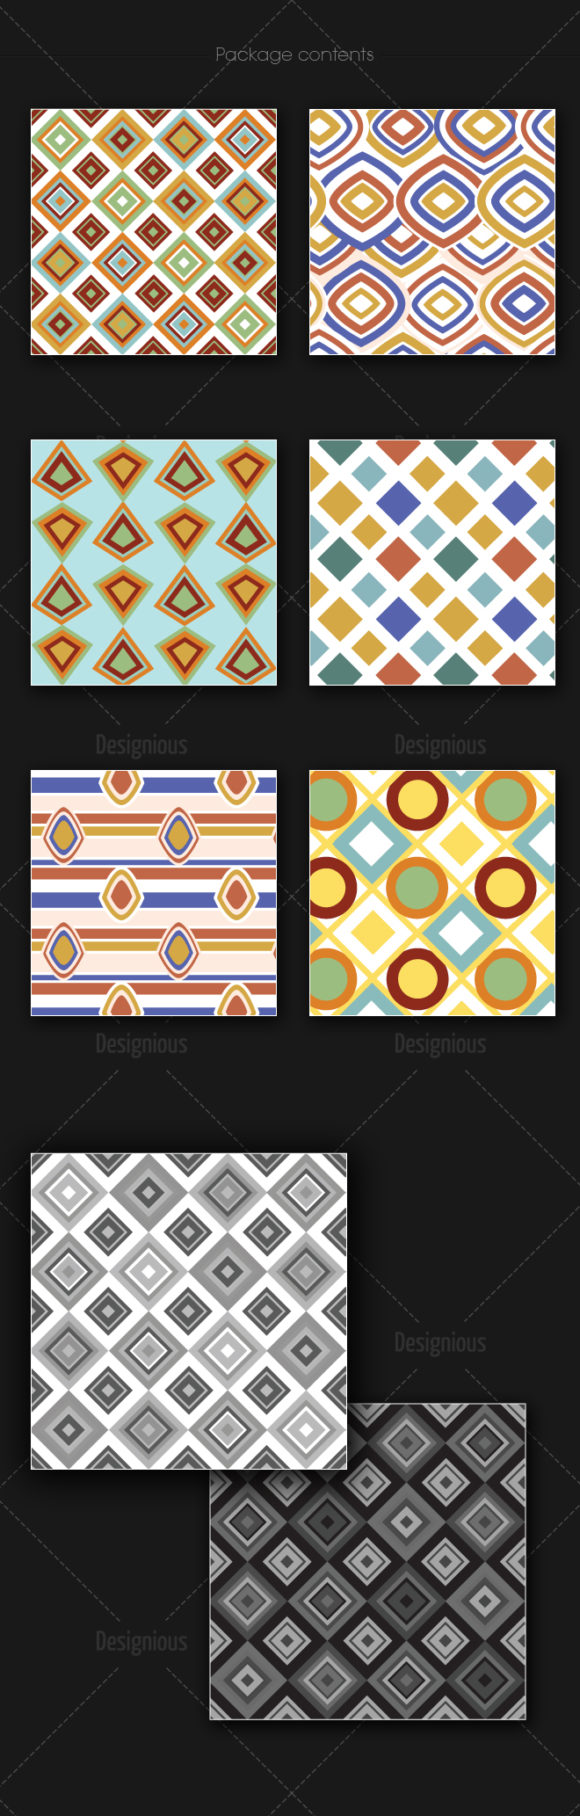 Seamless Patterns Vector Pack 155 2